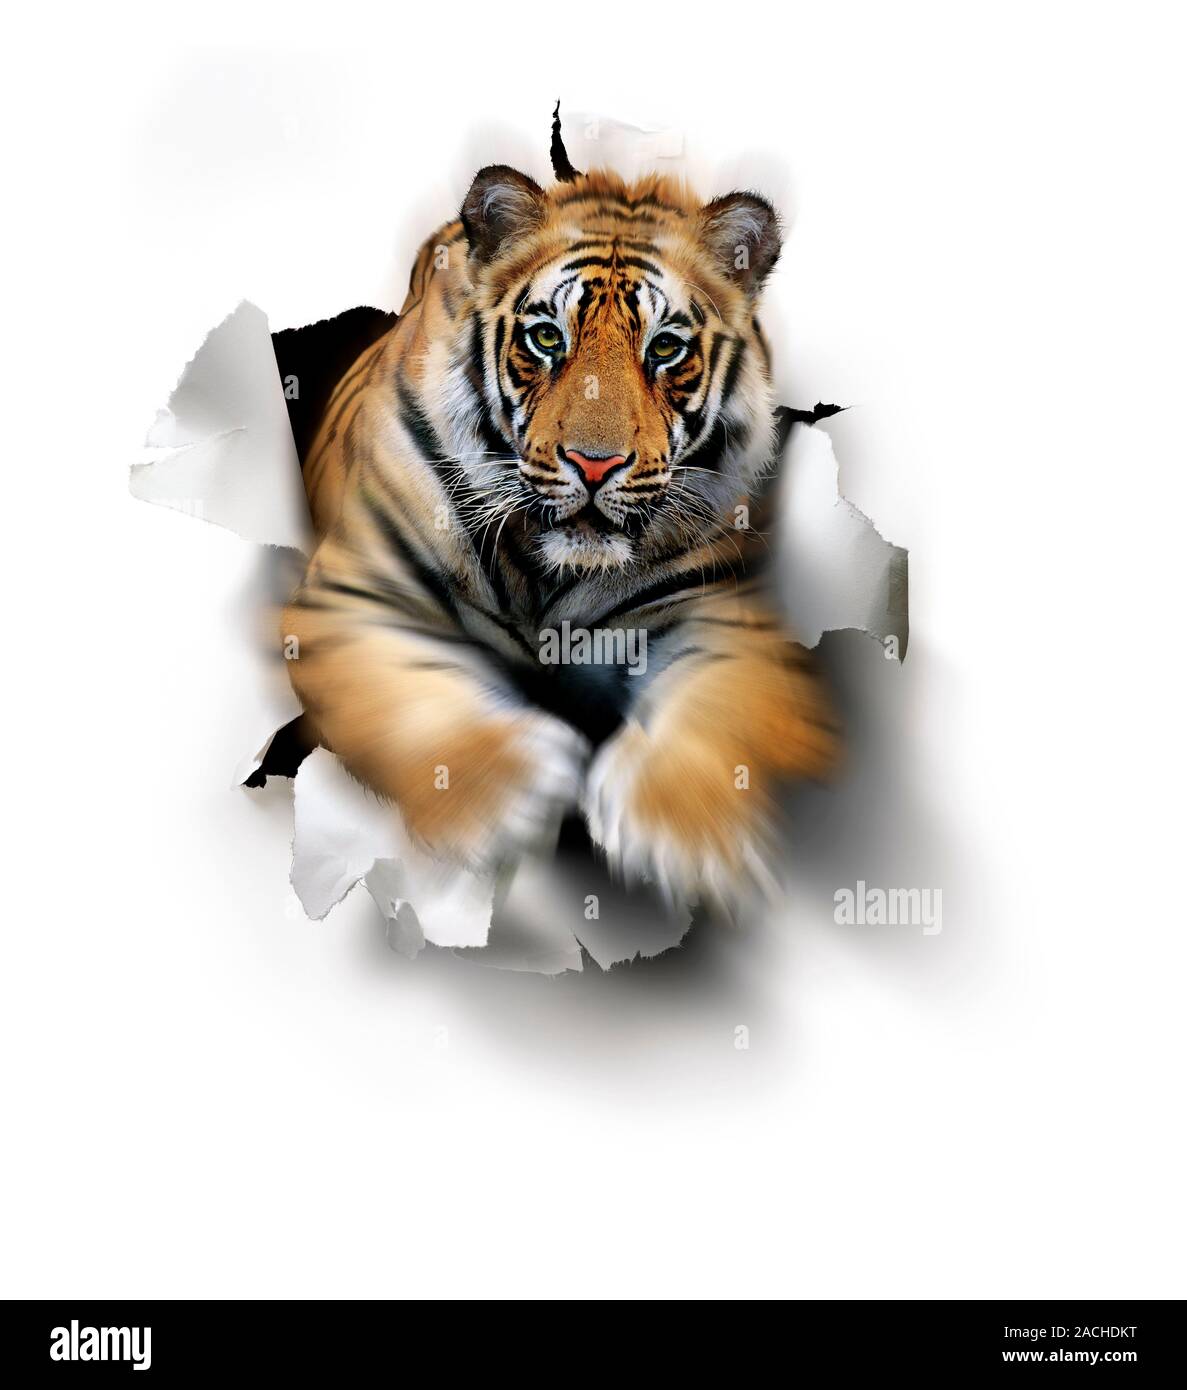 Tiger. Computer artwork of a tiger jumping through a paper wall. Stock Photo